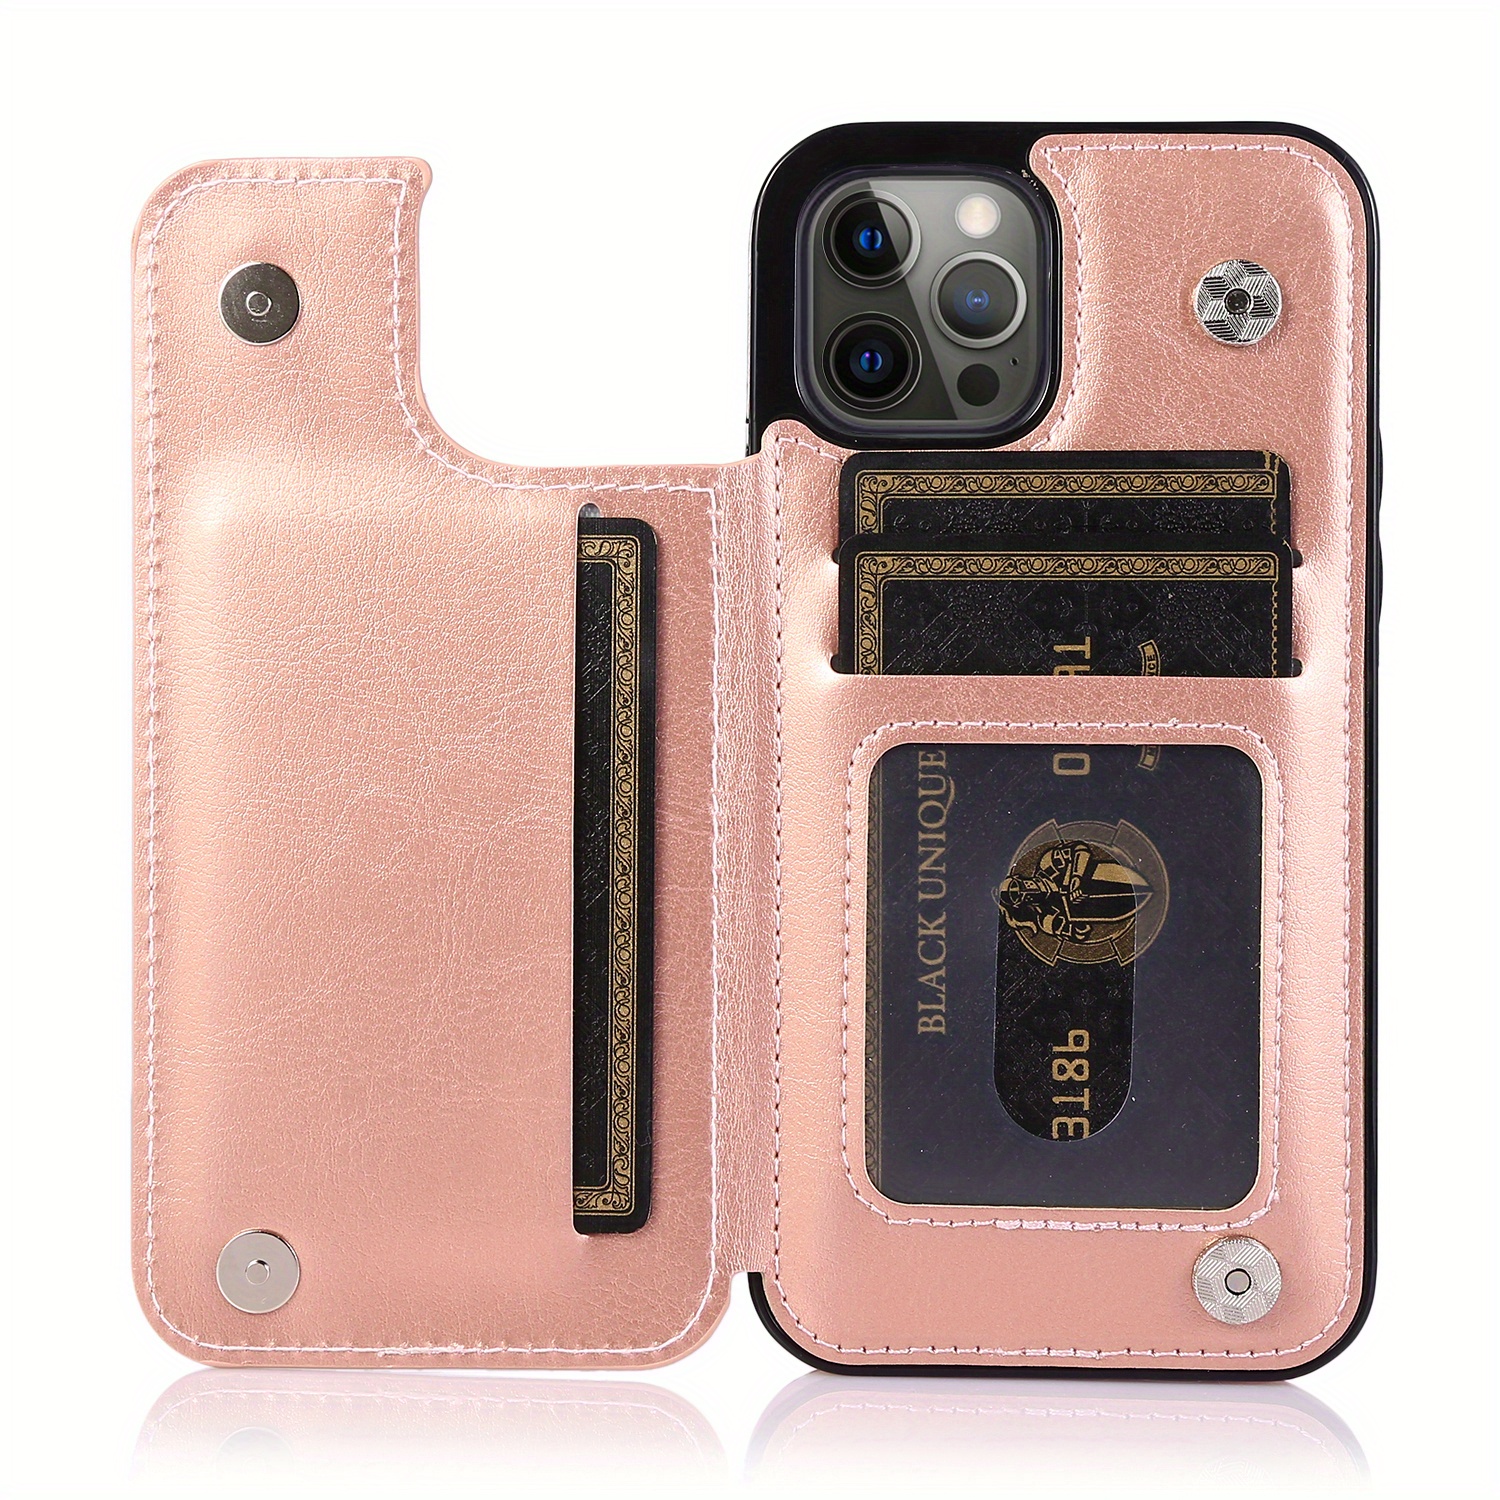 iPhone 11 Pro Max Wallet Case with Magnetic Closure